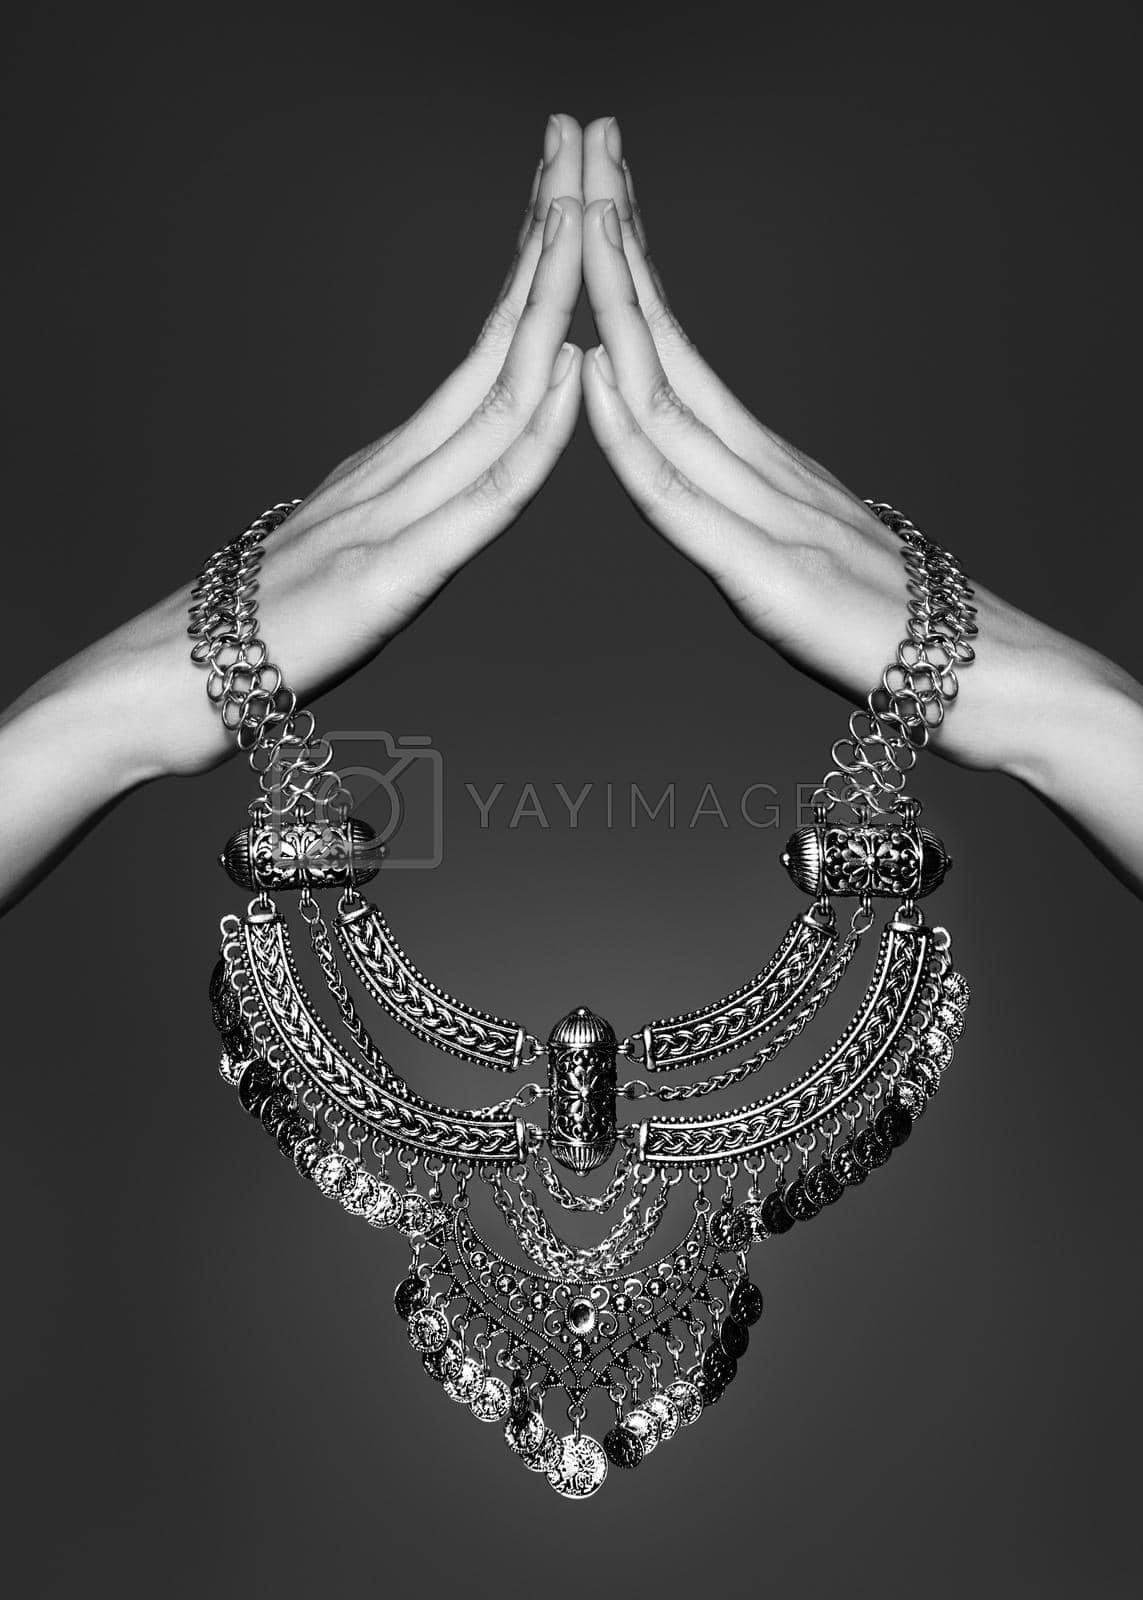 Silver Necklace Jewelry in Woman Hands. Beautiful Fashion Accessories. Luxury Gift, Tibet Silver Jewellery on Grey Background. Black and White